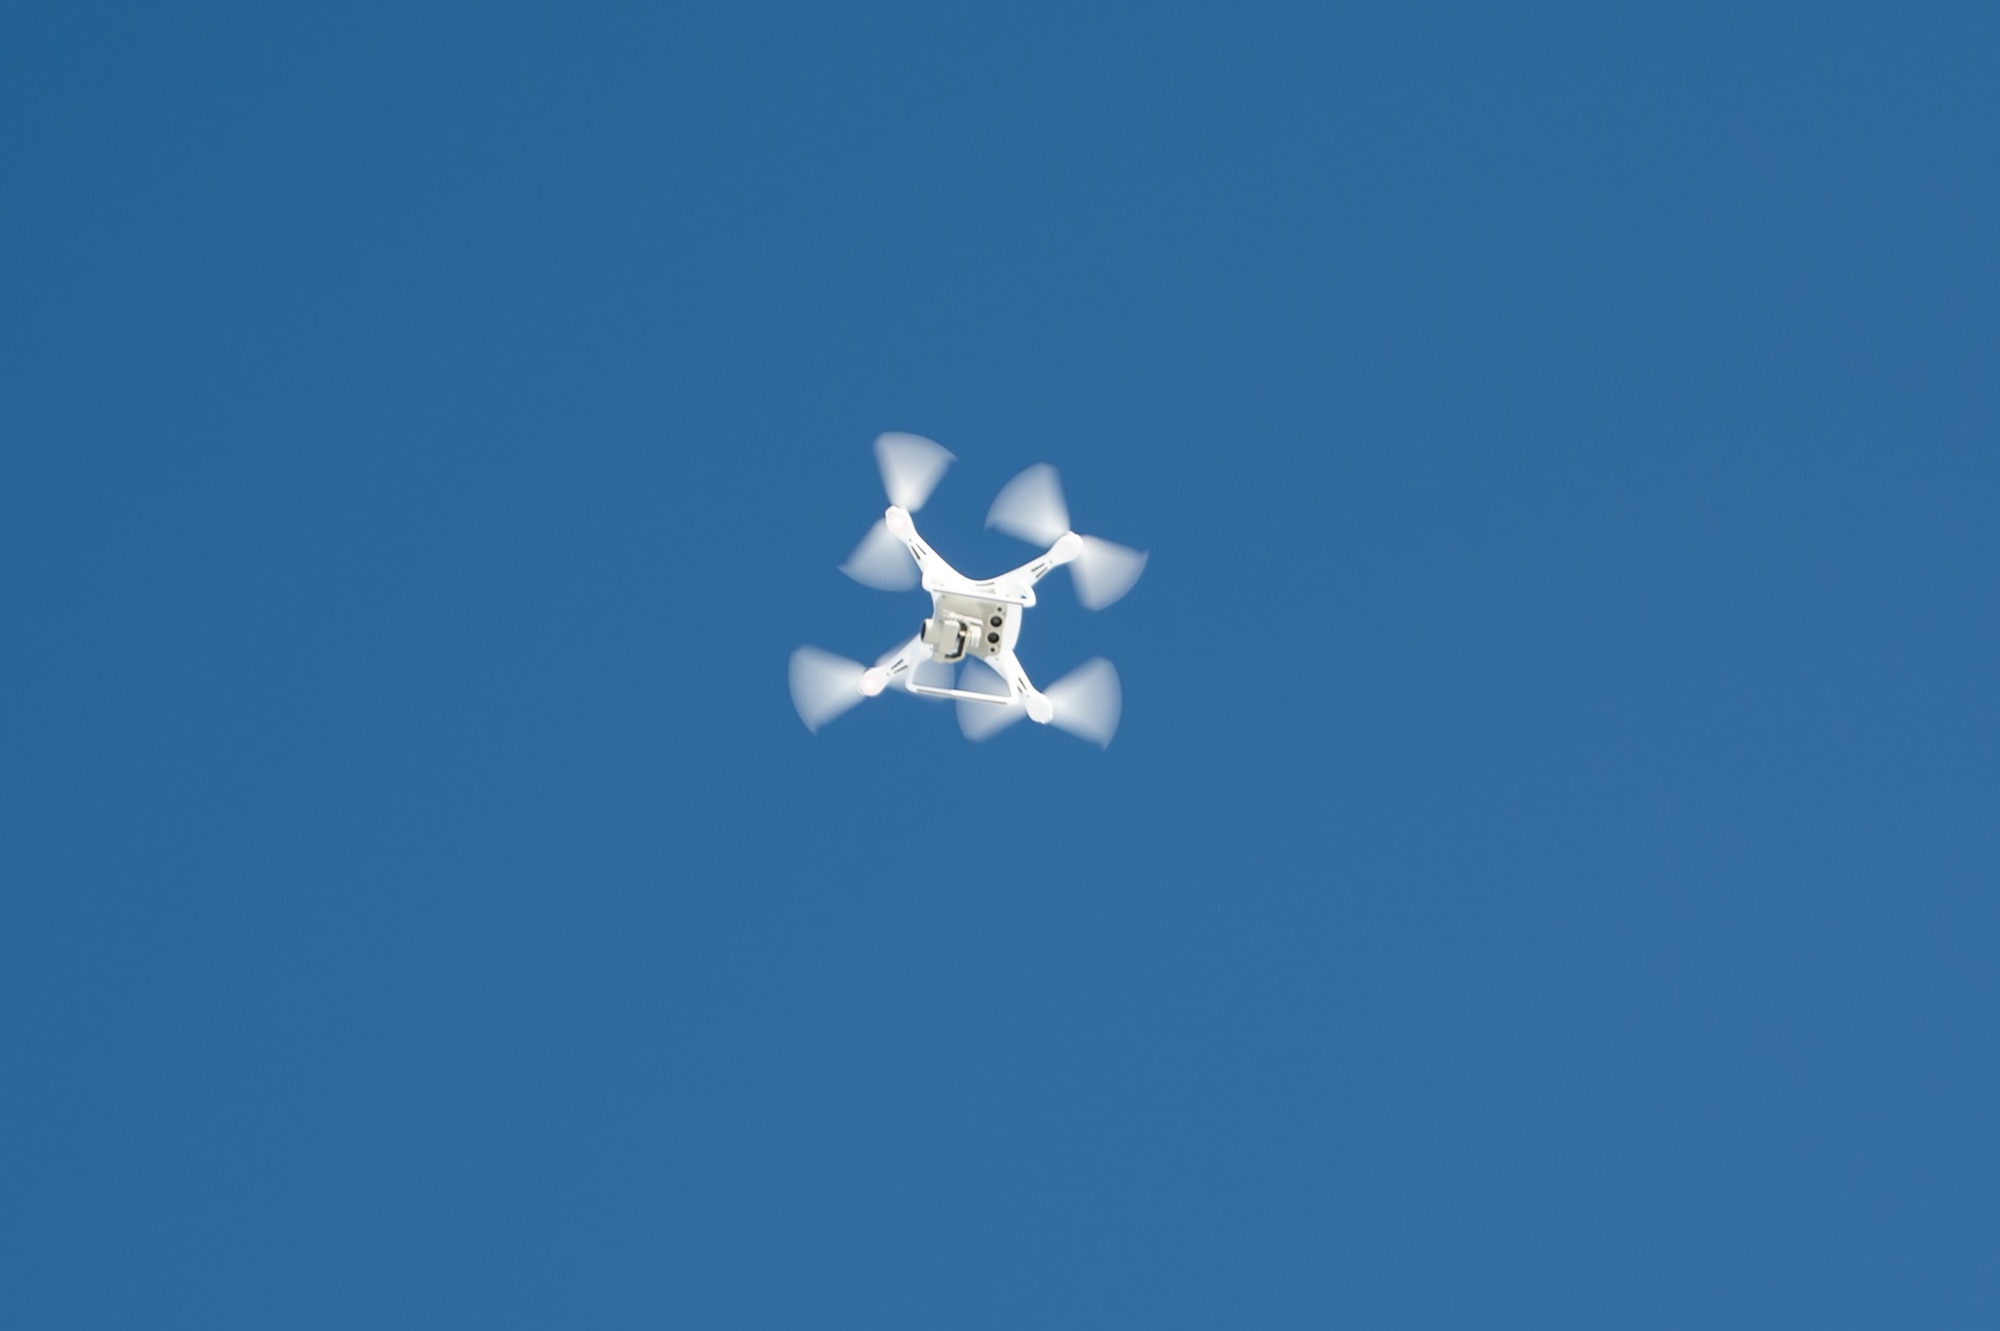 A drone flies above Eielson Air Force Base during a drone test.